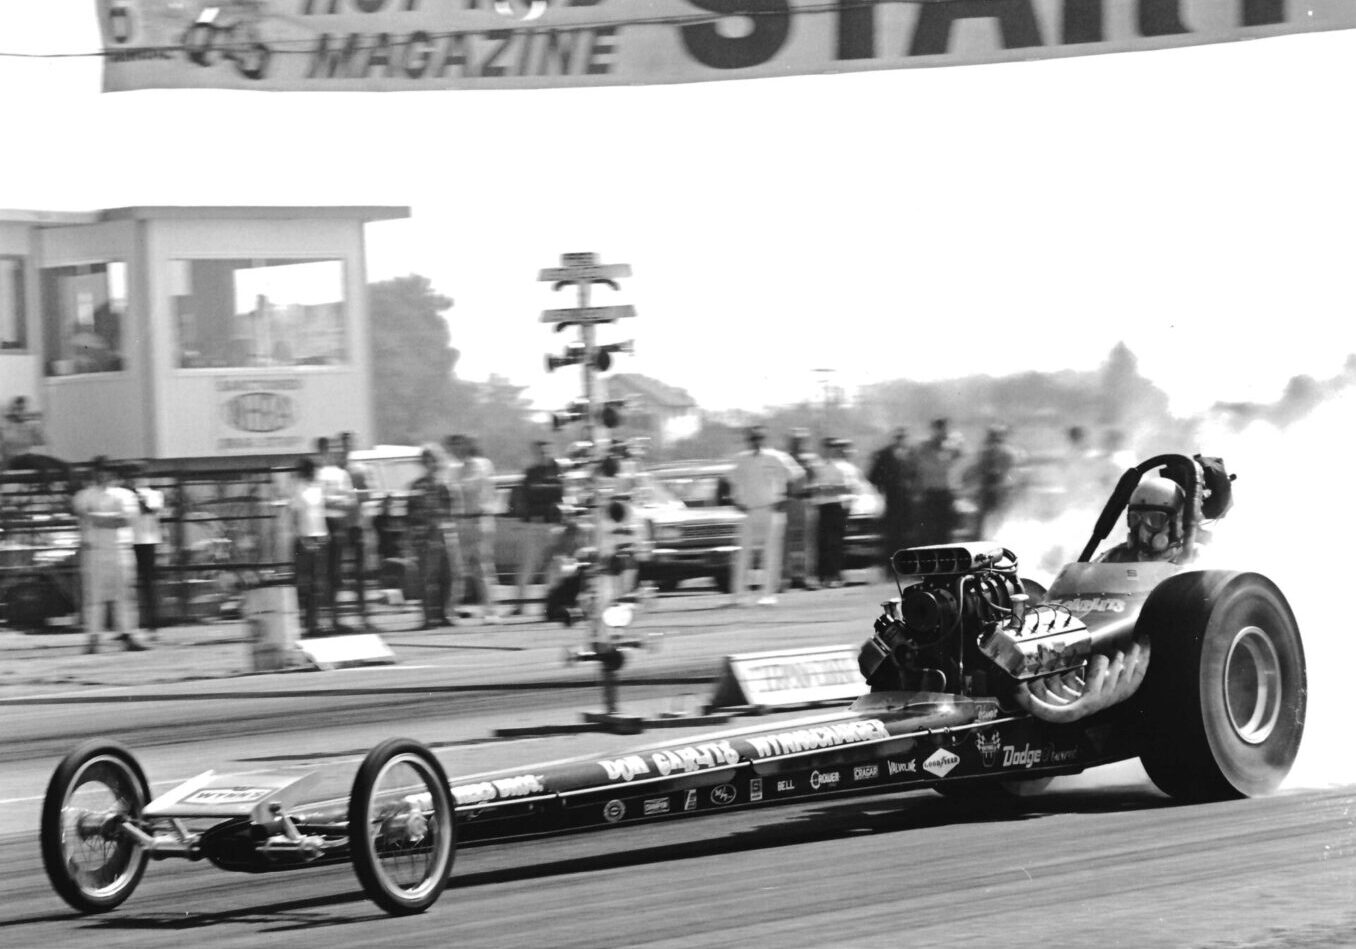 A black and white photo capturing the essence of a drag racer as they speed towards victory.